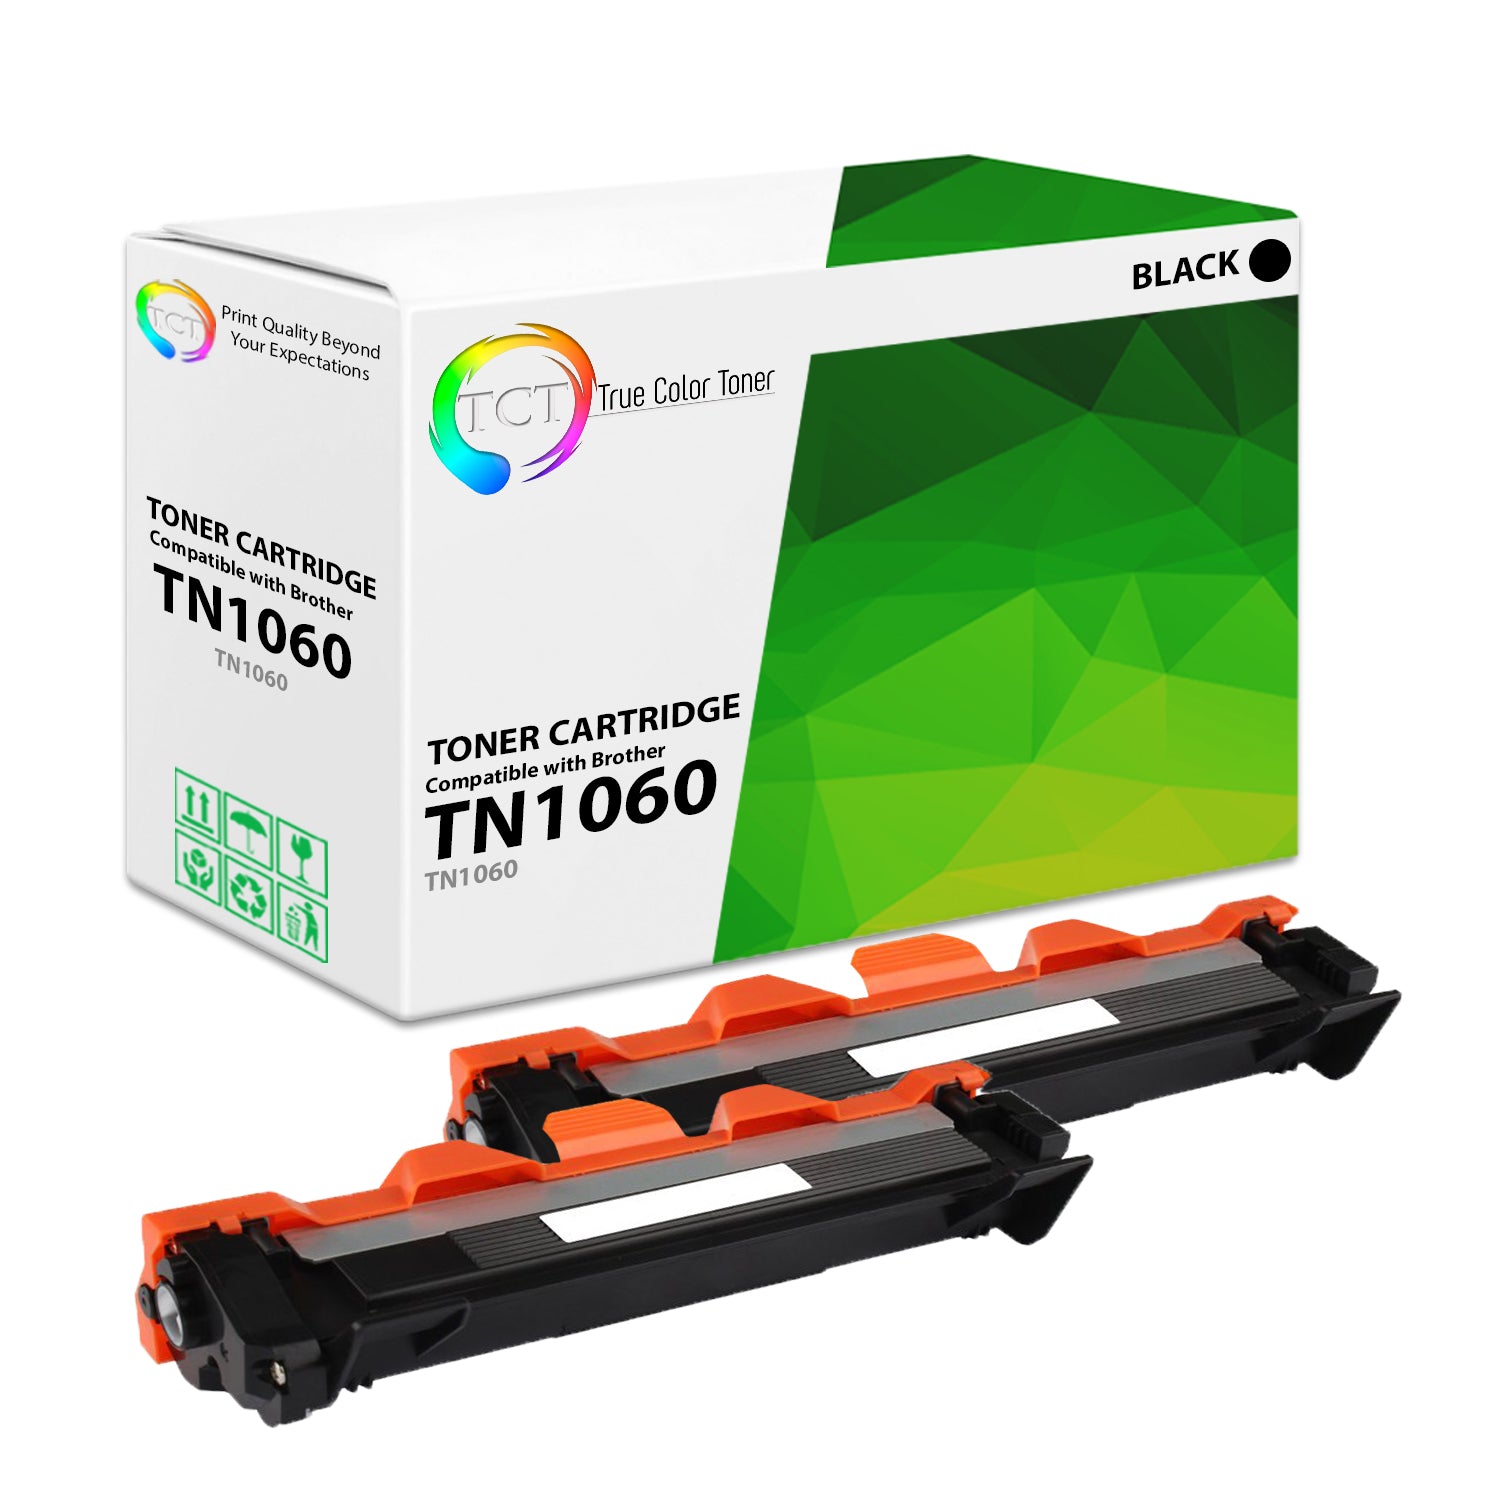 TCT Compatible Toner Cartridge Replacement for the Brother TN1060 Series - 2 Pack Black